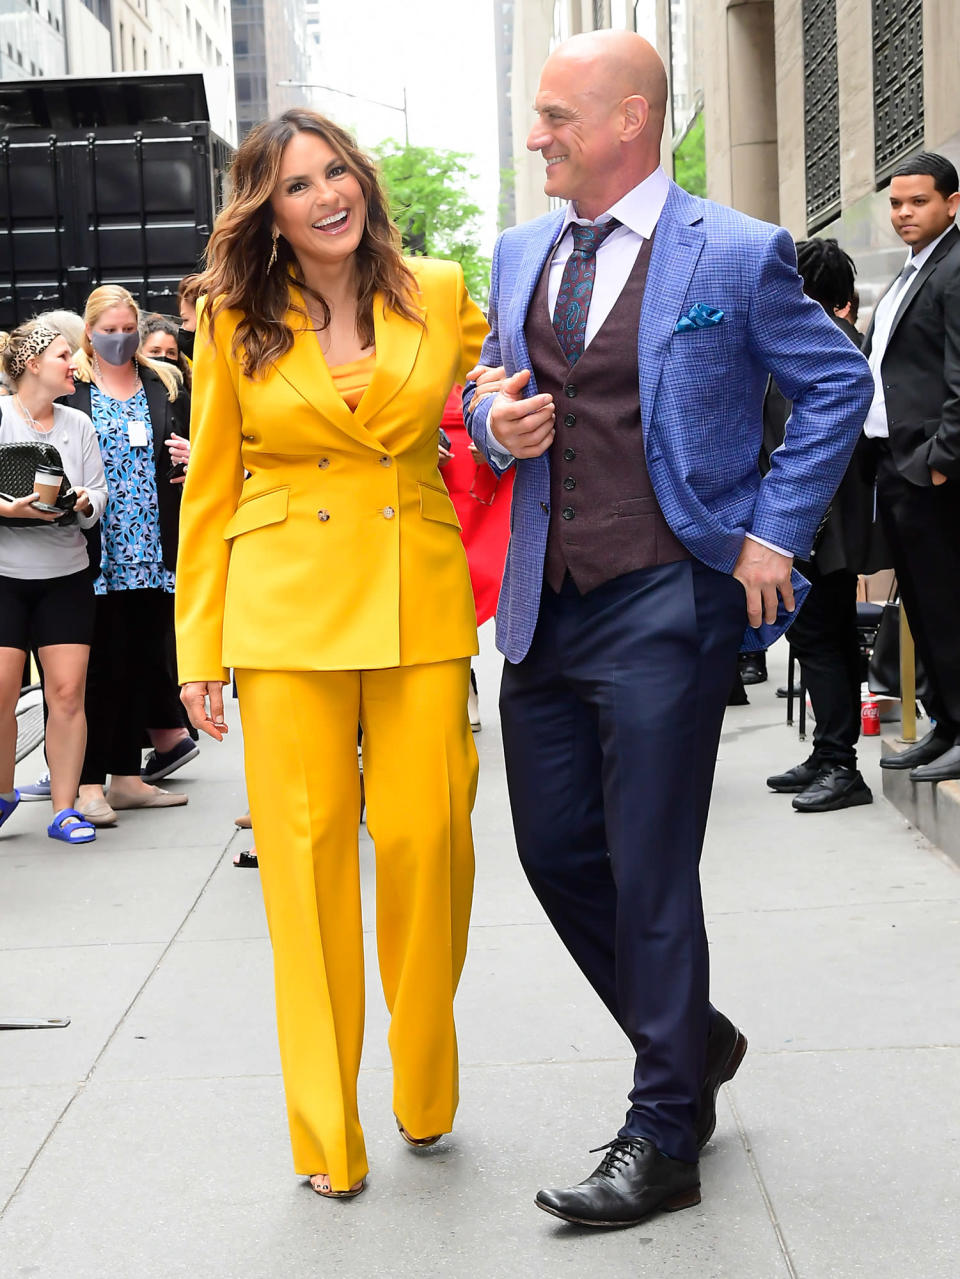 <p>Mariska Hargitay and Christopher Meloni arrive at the NBCUniversal Upfronts at Radio City Music Hall in N.Y.C. on May 16. </p>